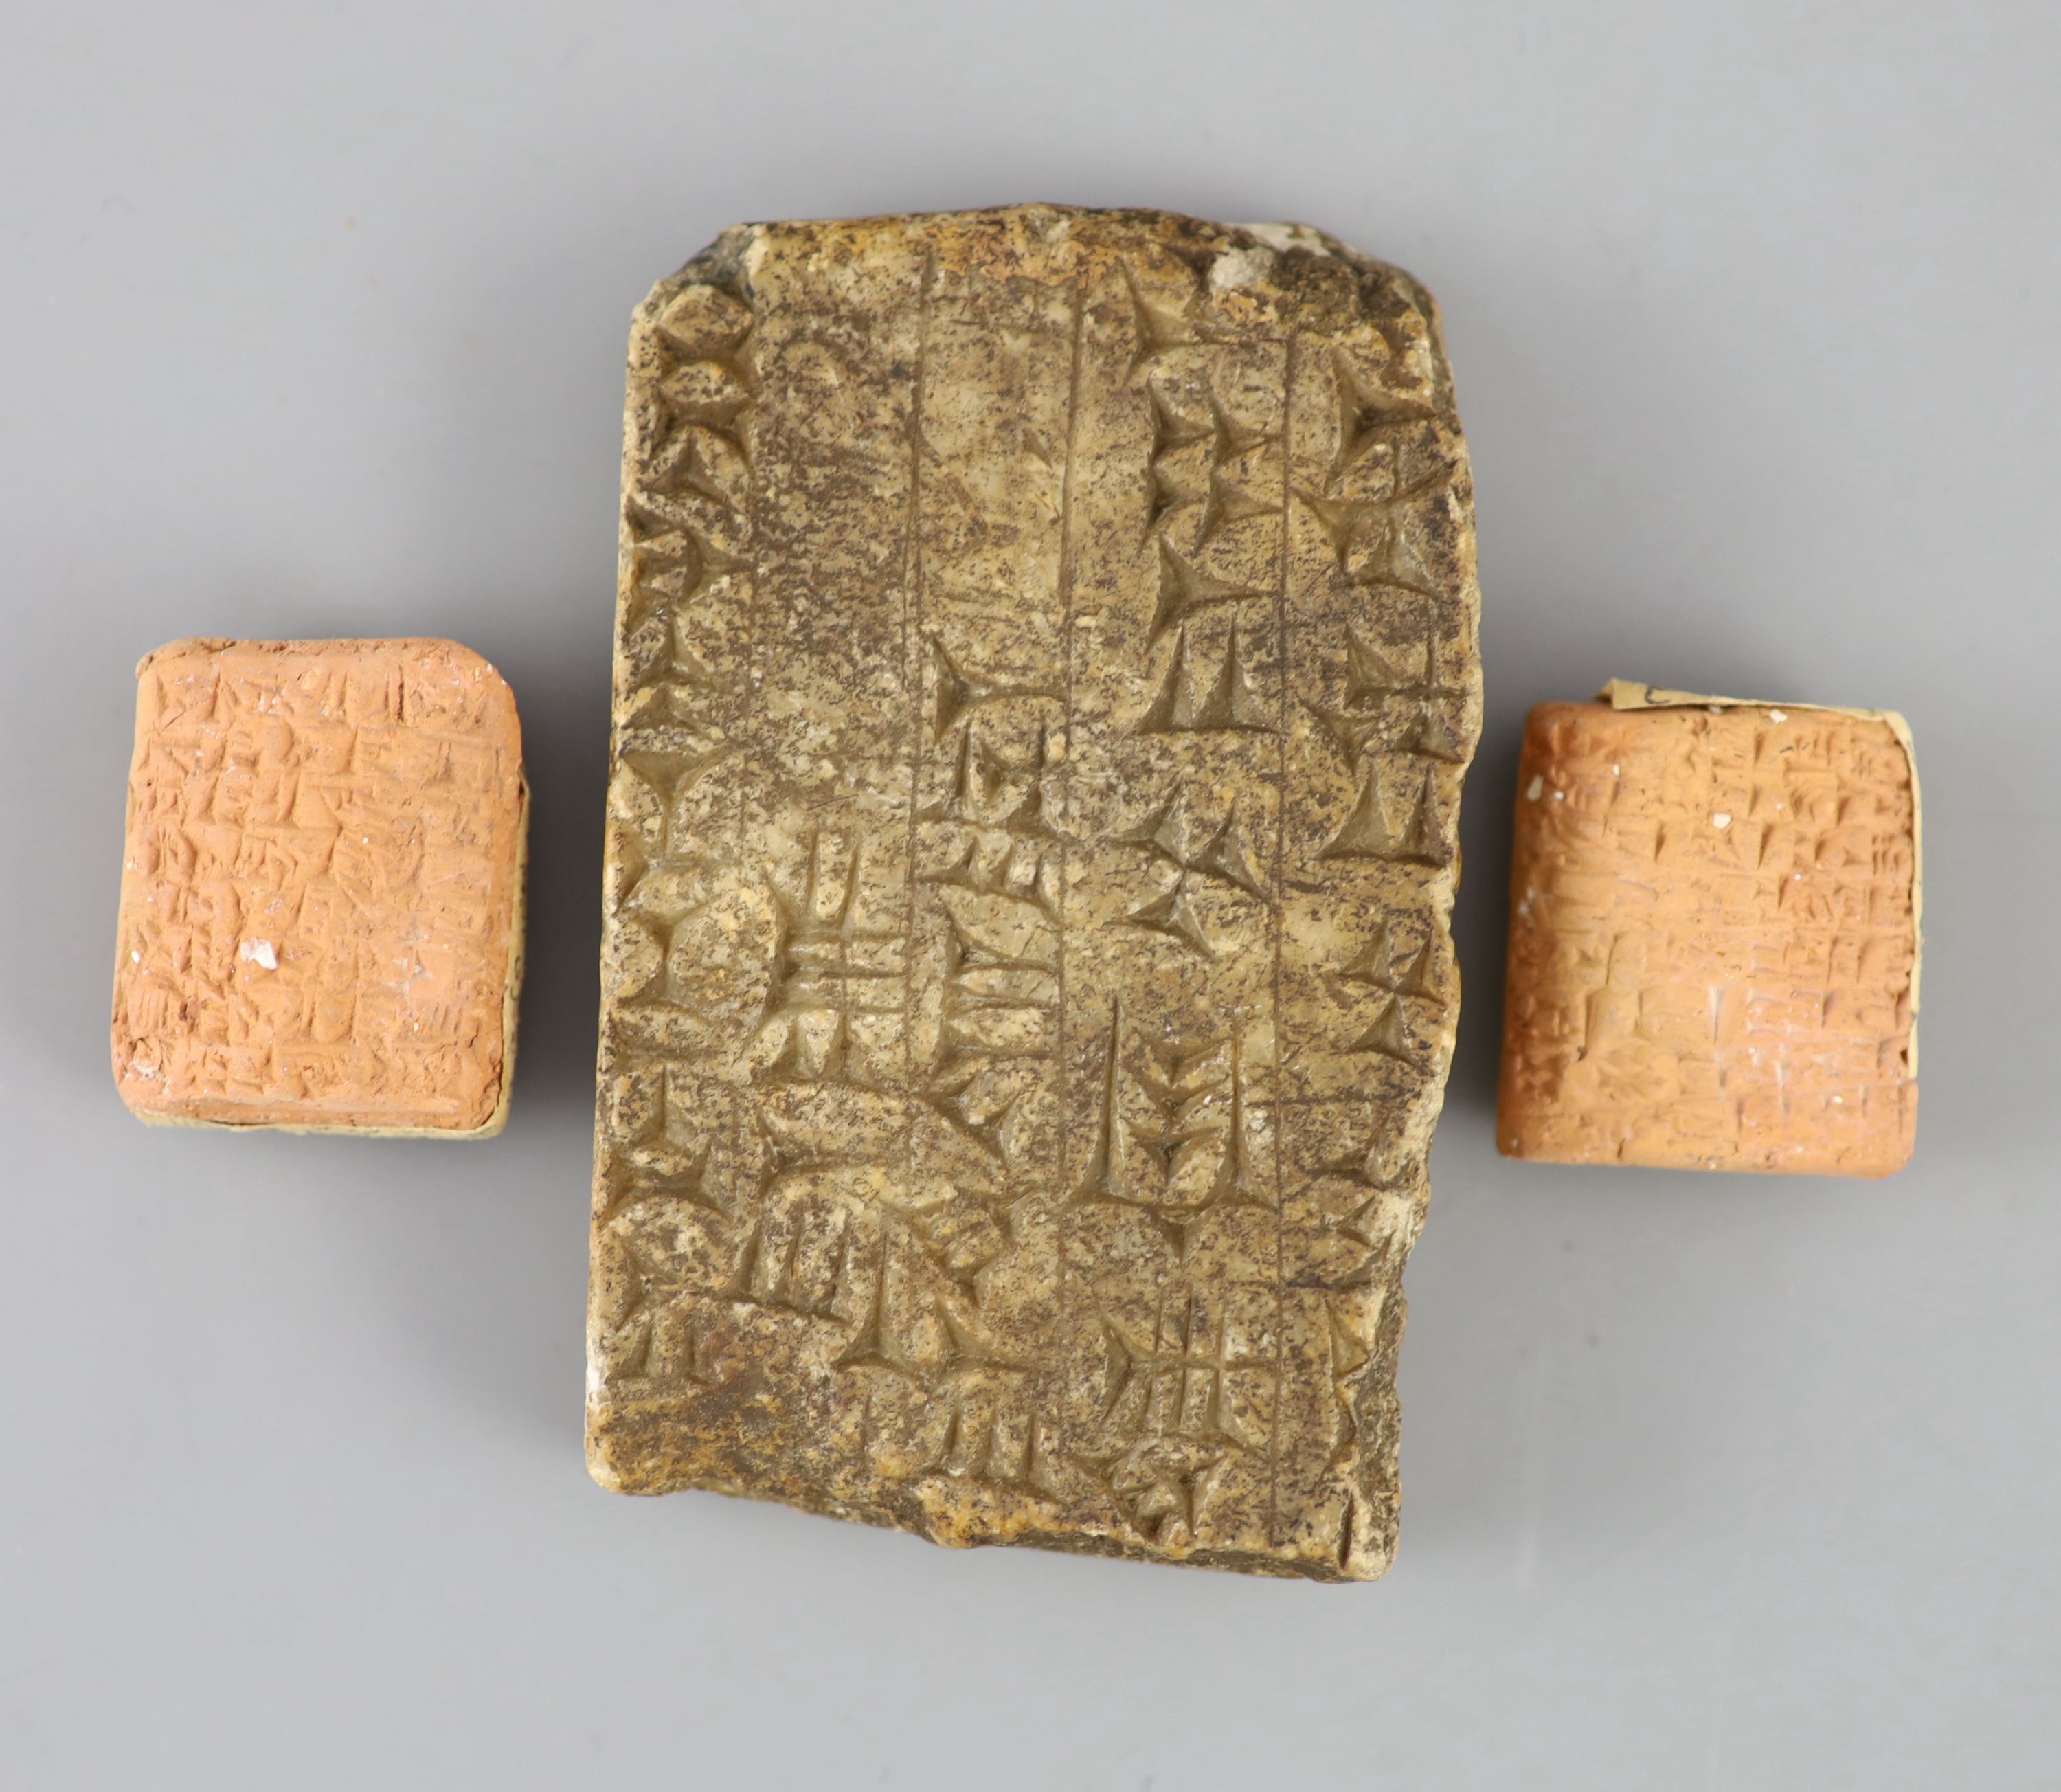 An Ancient Assyrian fragment of a cuneiform alabaster slab, probably 9th century BC from Kouyunjik (Nineveh) and two clay cuneiform tab